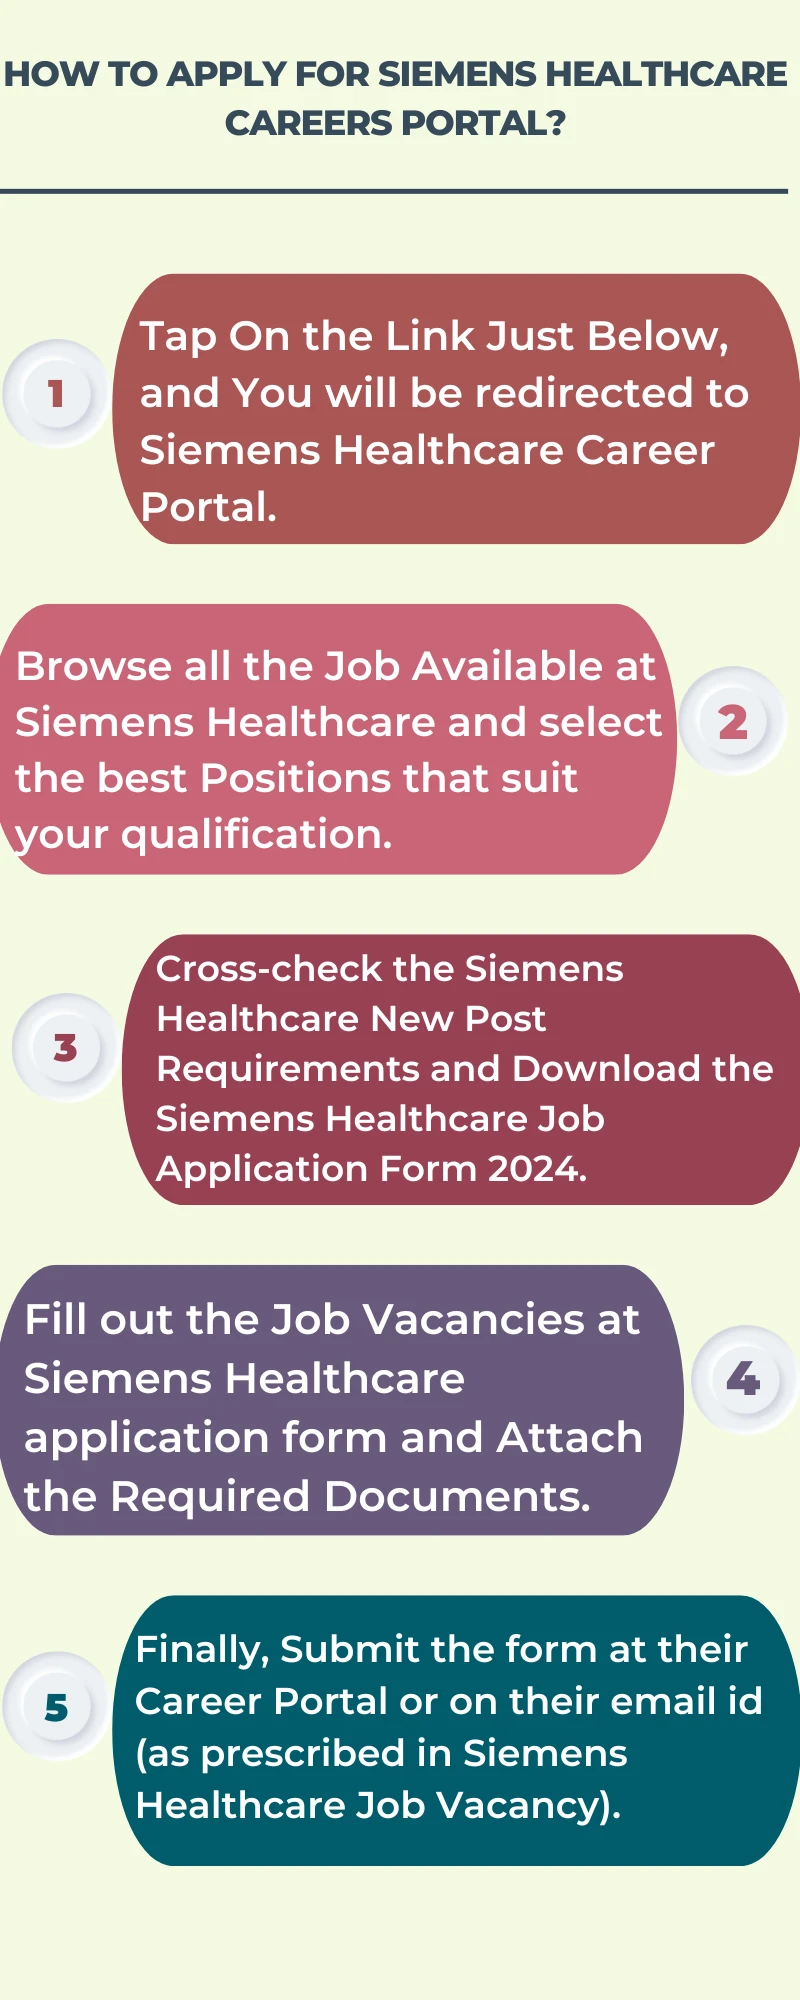 How To Apply for Siemens Healthcare Careers Portal?